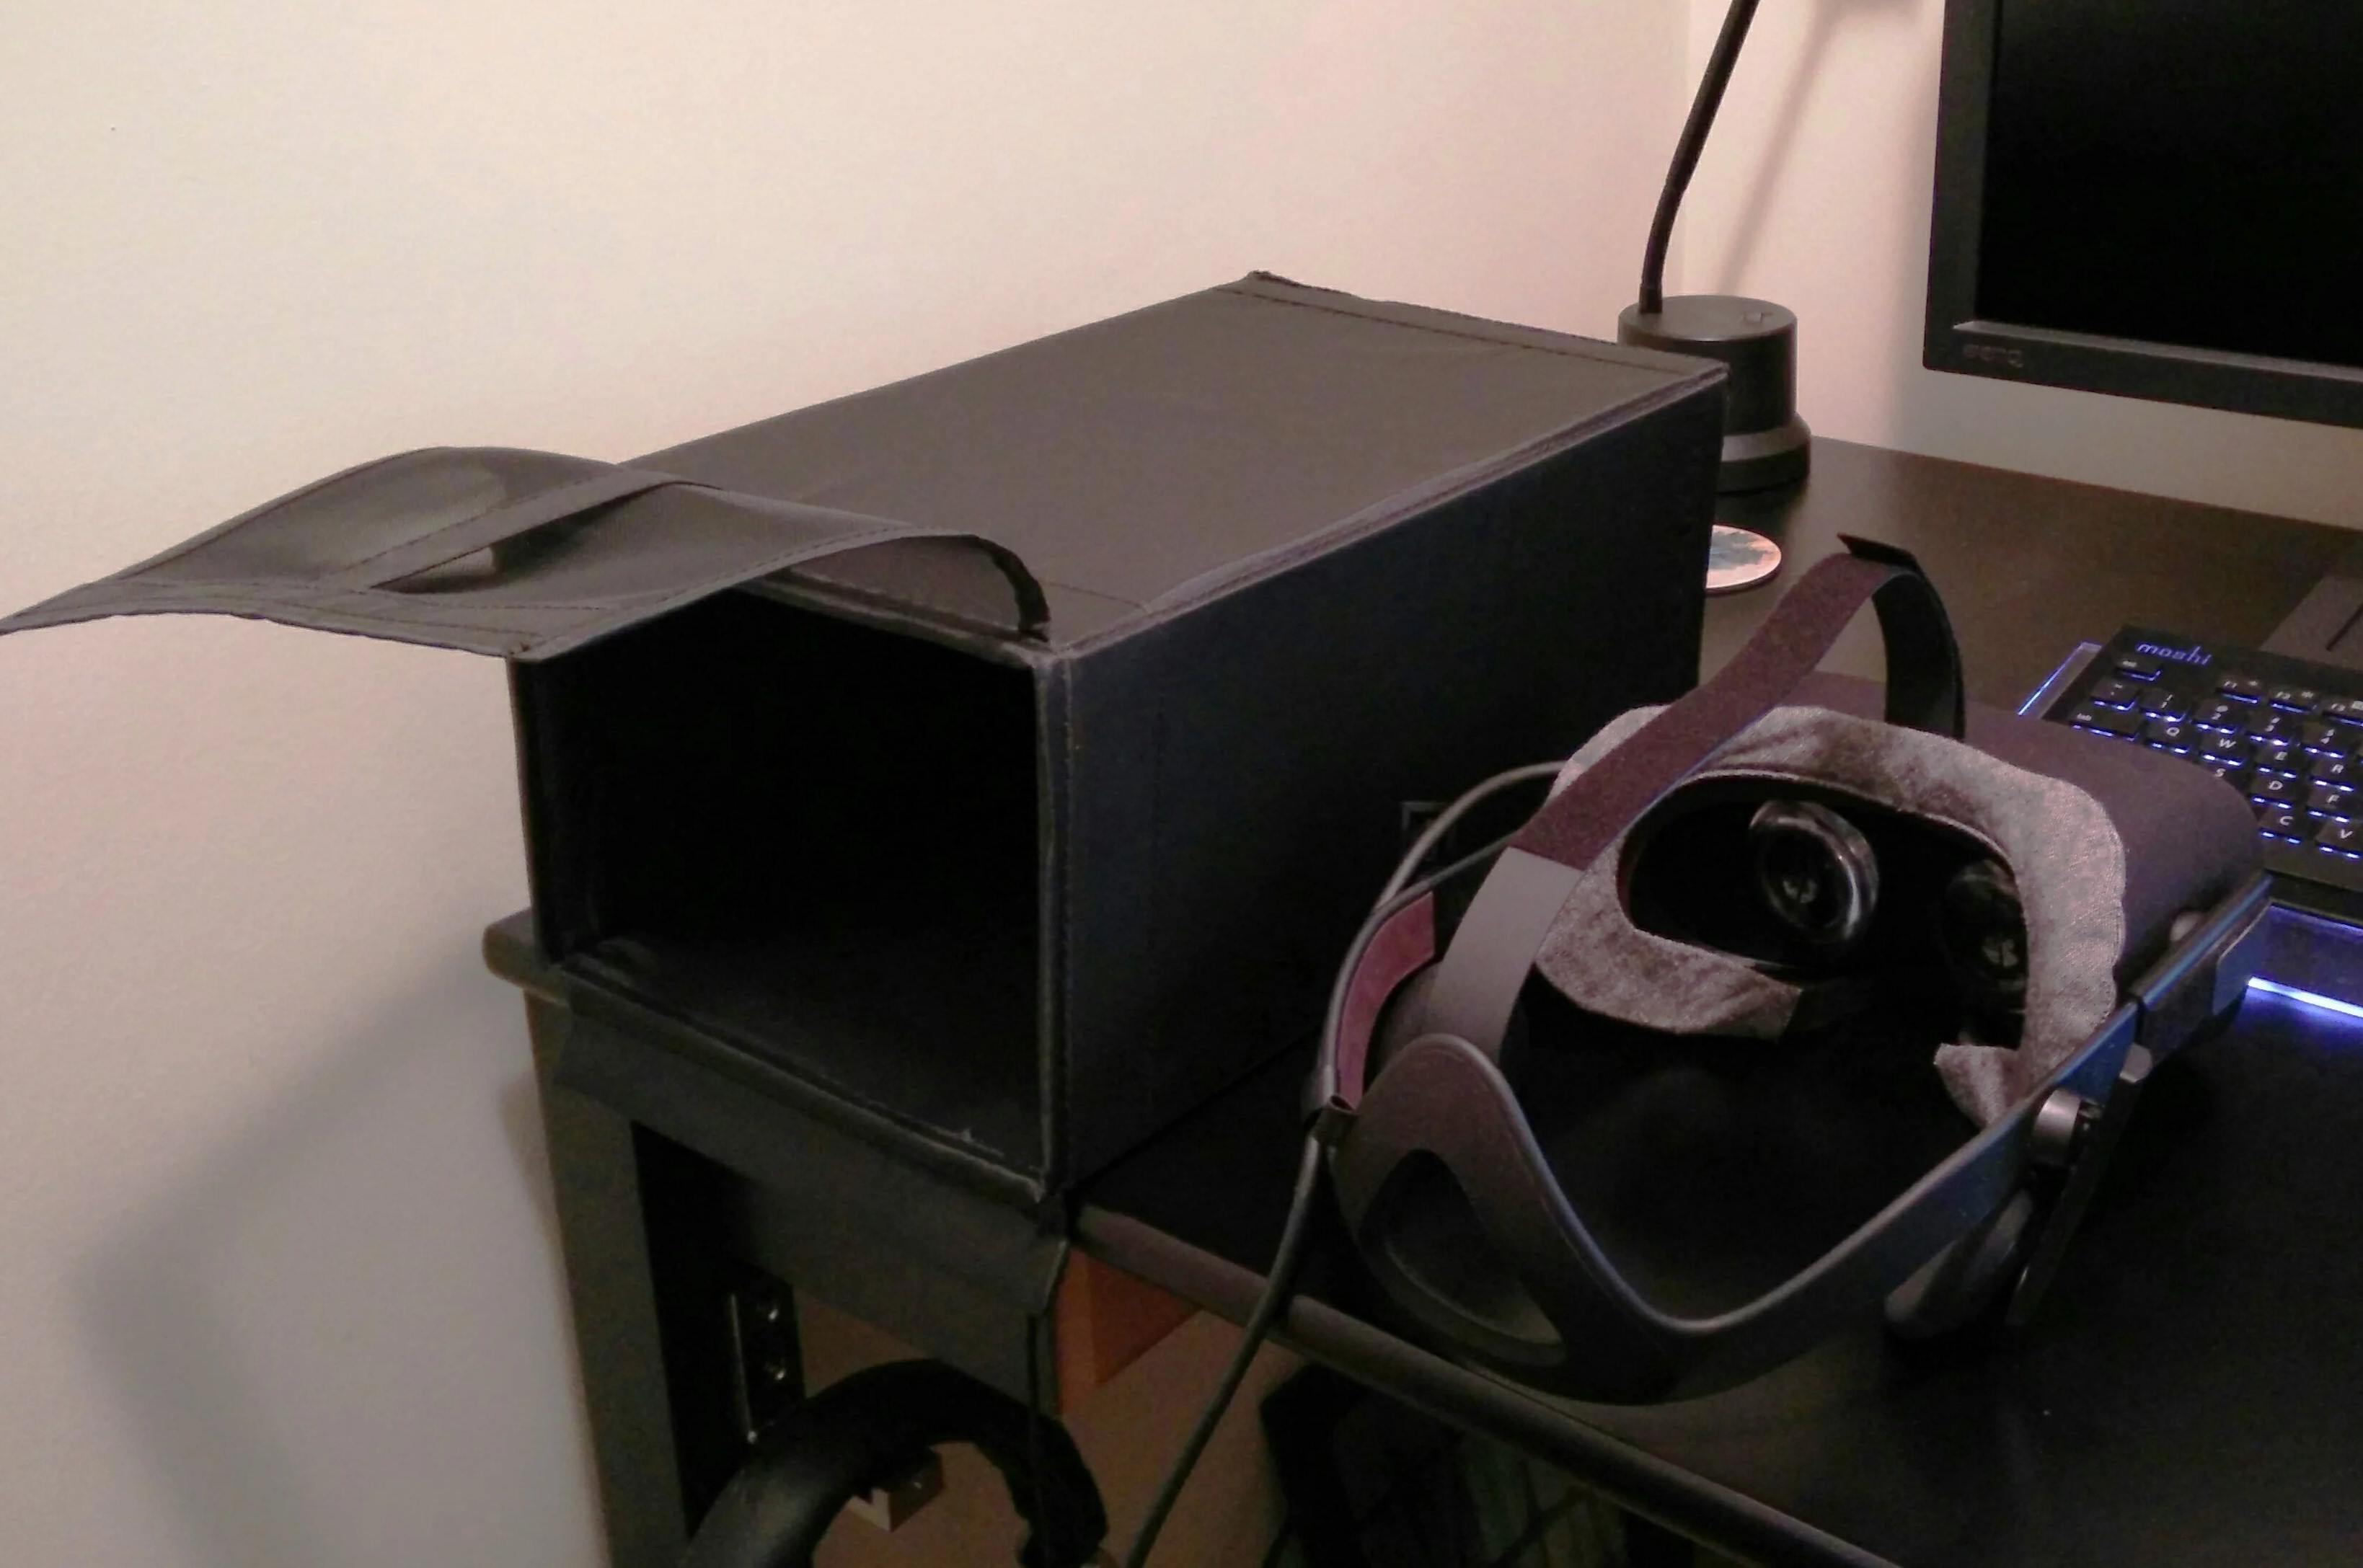 How To Store Oculus Rift When Not In Use